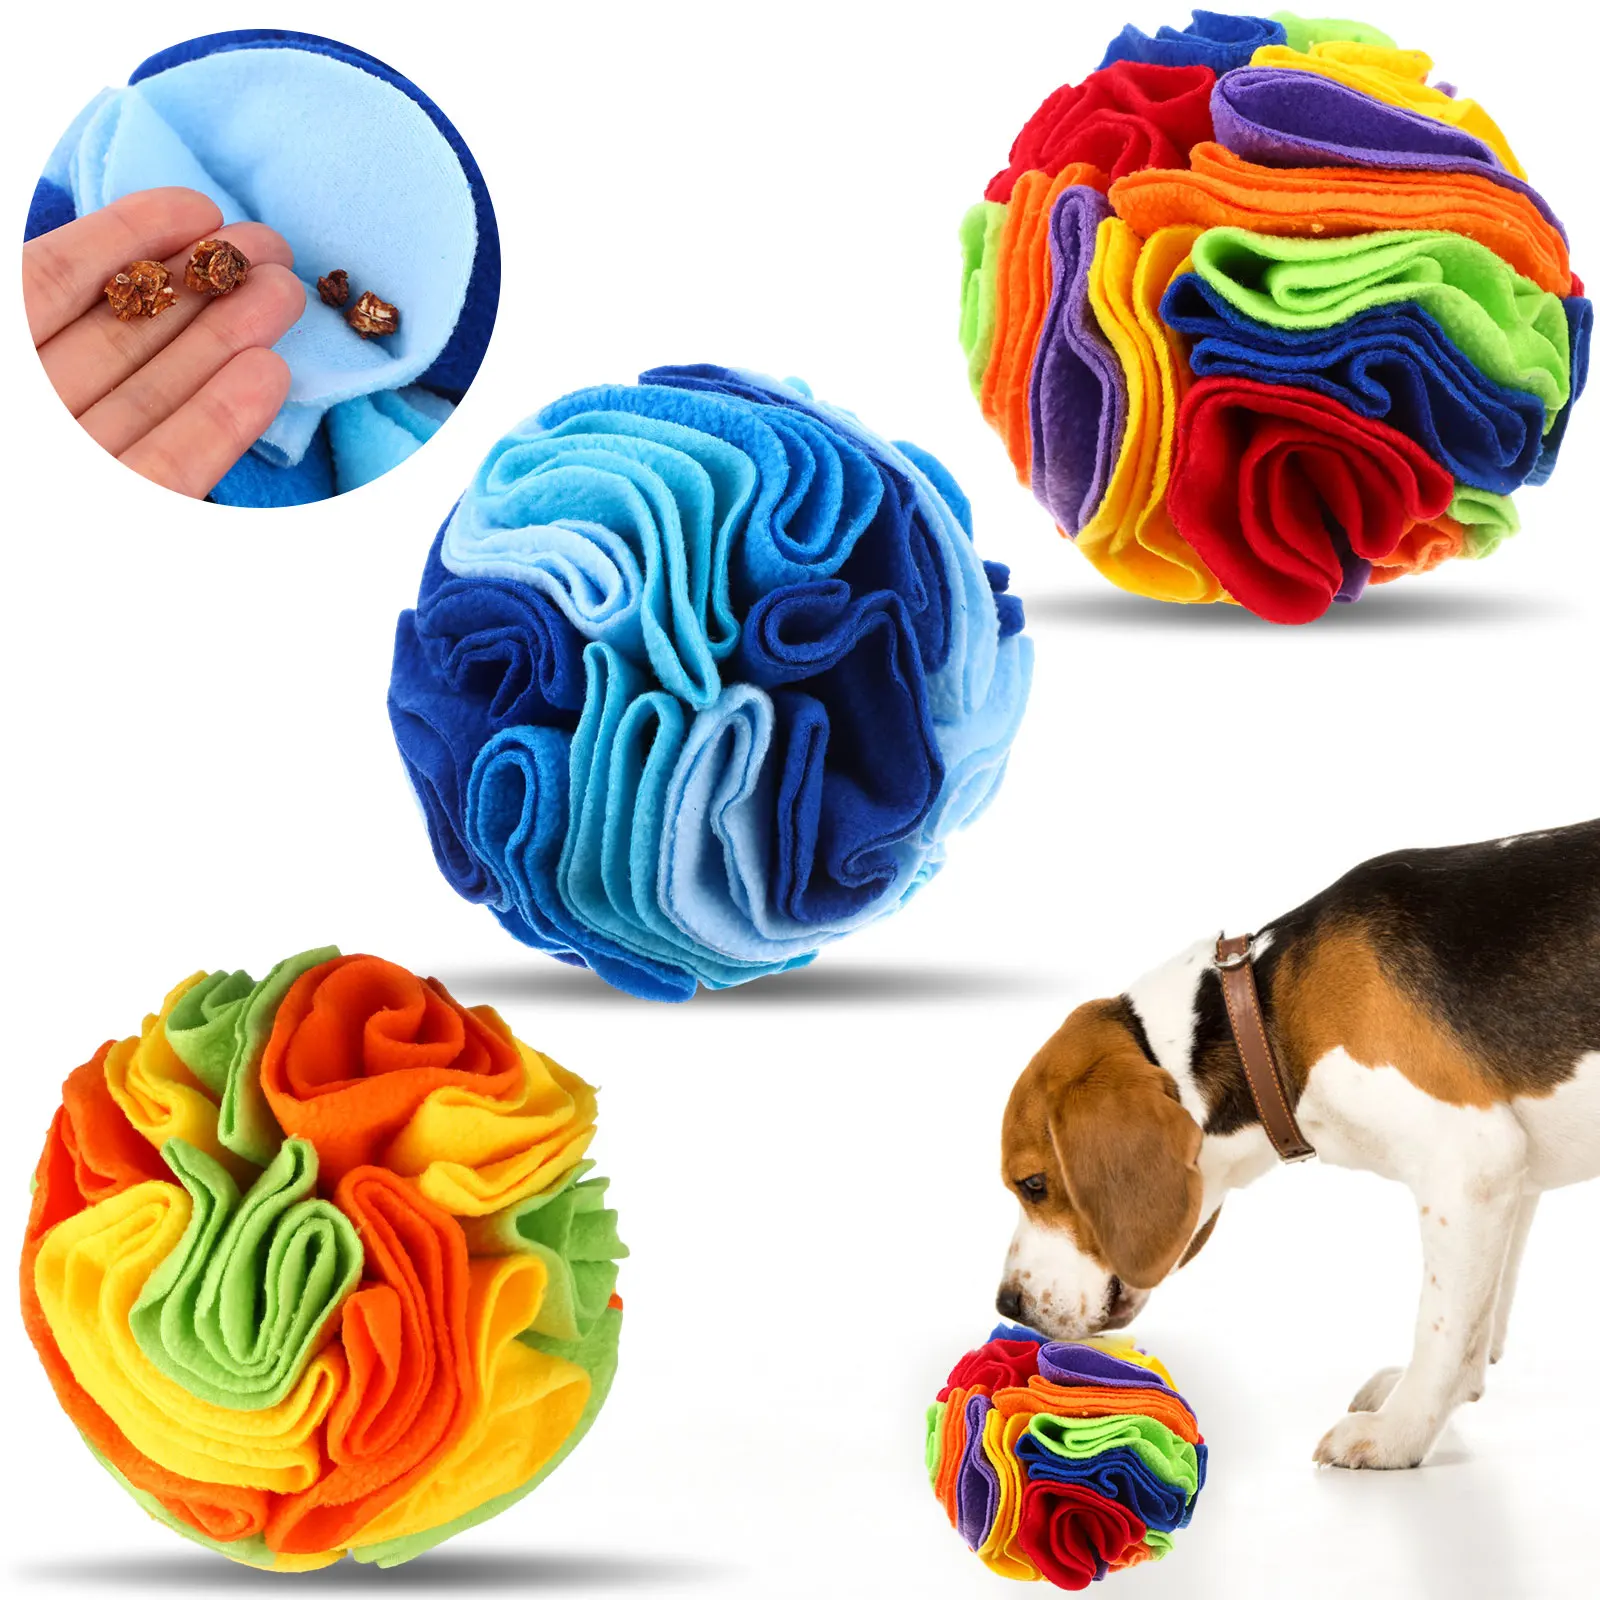 https://ae01.alicdn.com/kf/S9cce699d9e4d4d8cbae0e6450a22ba14V/3-Pcs-Snuffle-Ball-for-Dogs-Stress-Relief-Dog-Snuffle-Ball-Toys-Dog-Foraging-Mat-Pet.jpg